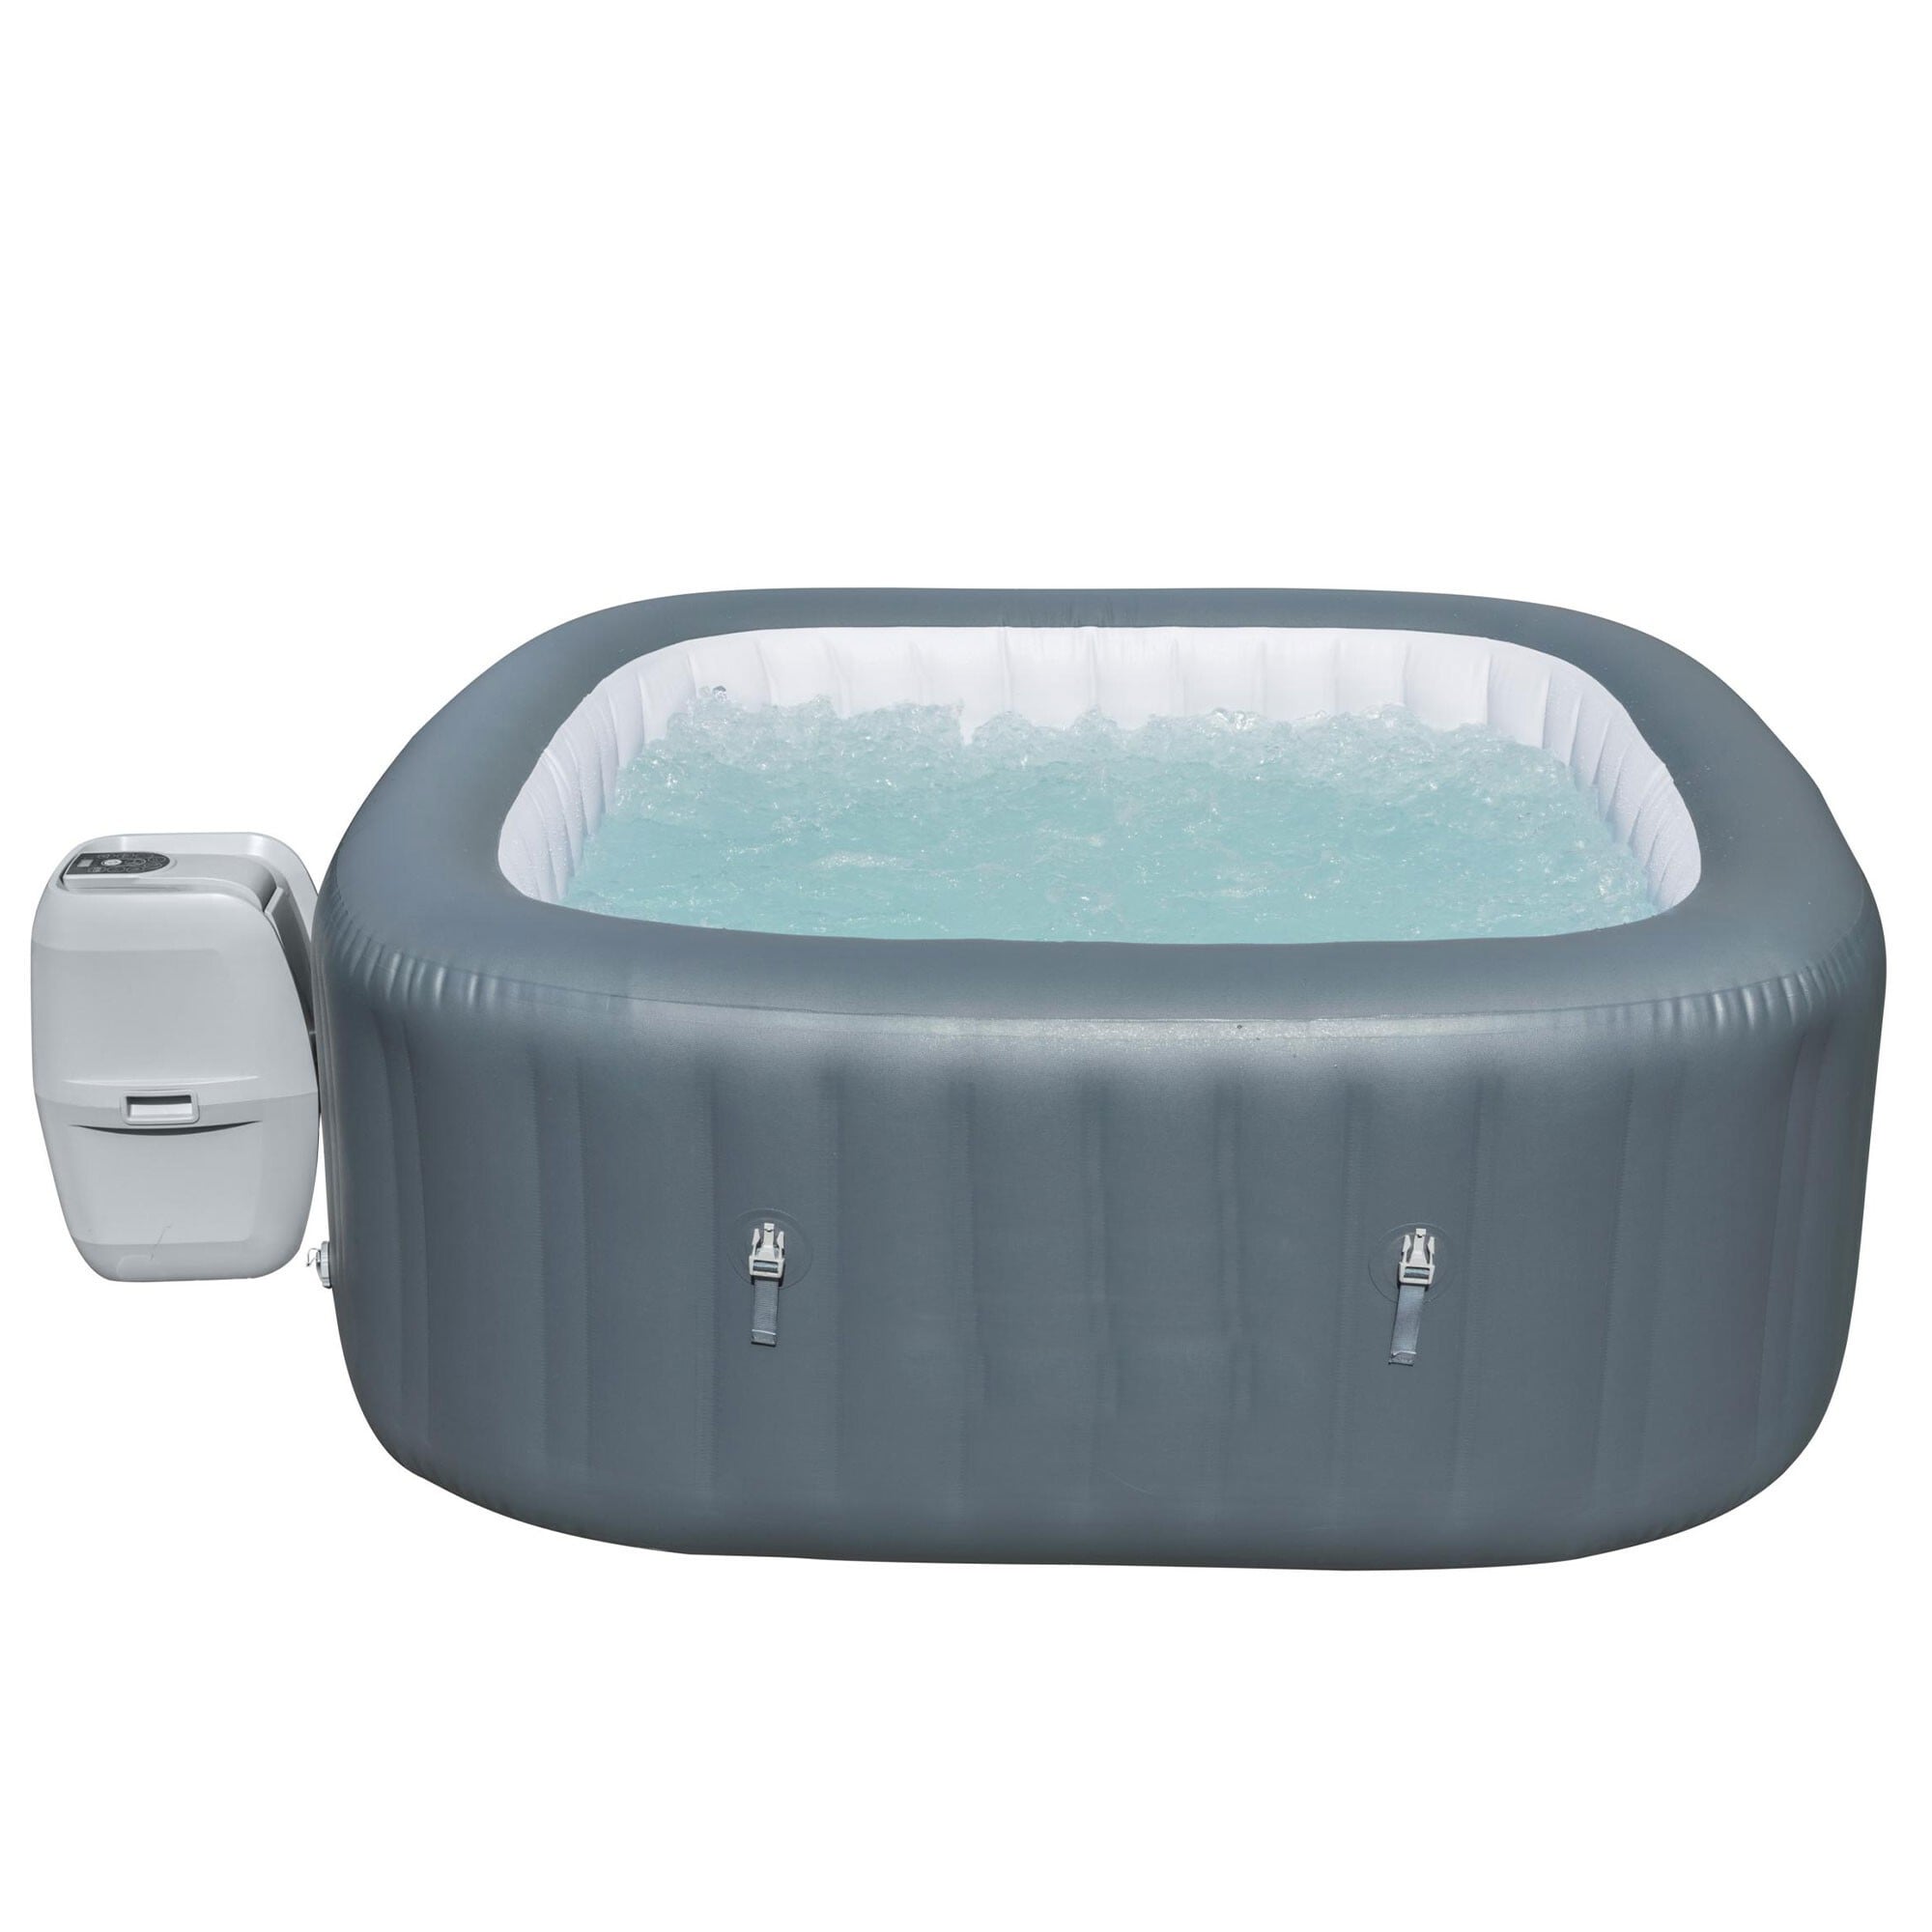 Bestway 71-in x 28-in 4-Person the department in Hot Square at & Spas Tubs Hot Inflatable Tub